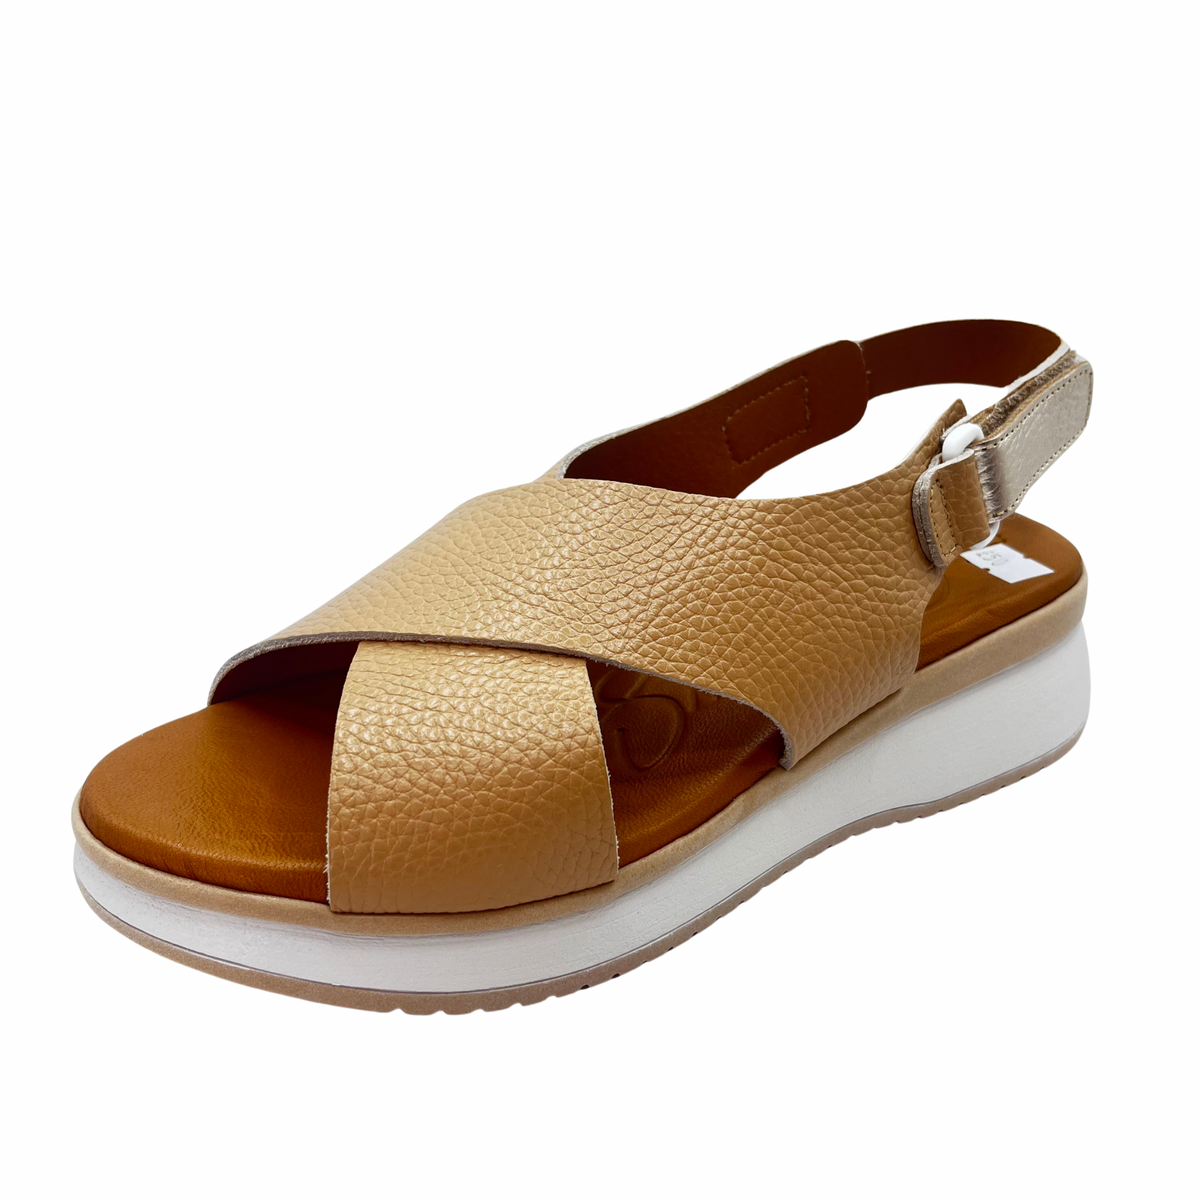 Oh My Sandals Beige Cross Over Wedge Leather Sandal